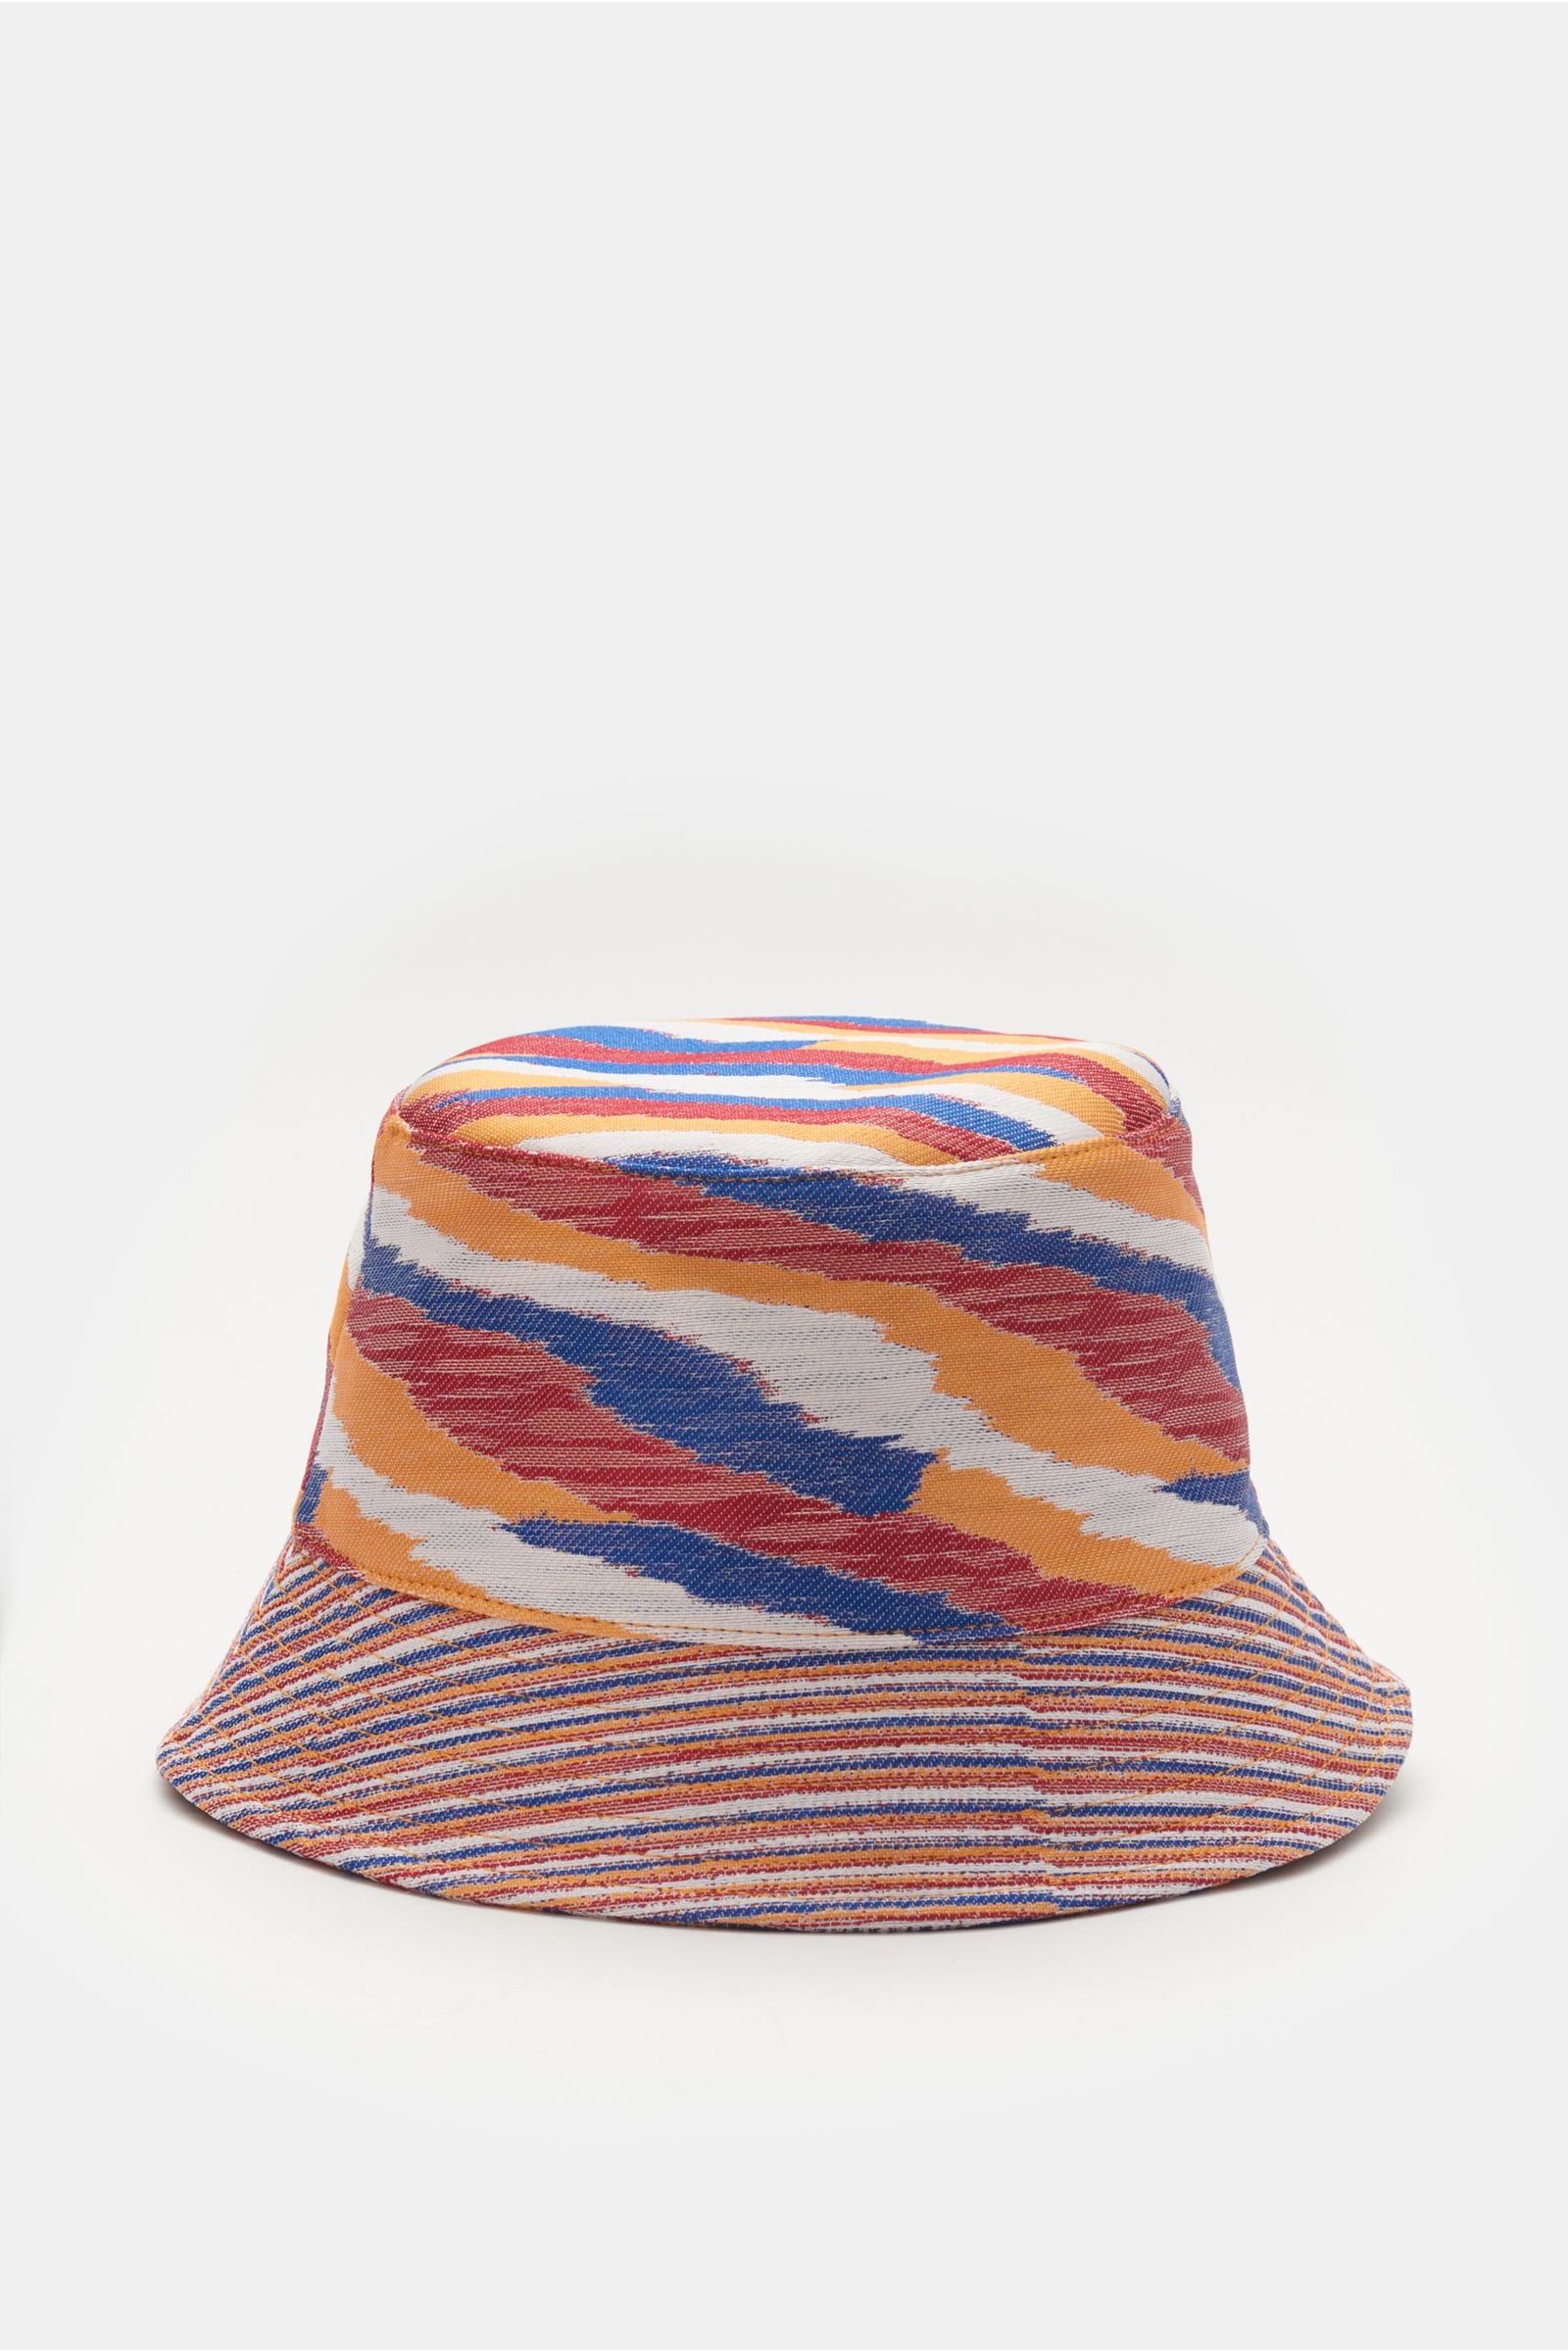 Bucket hat white/red/blue patterned